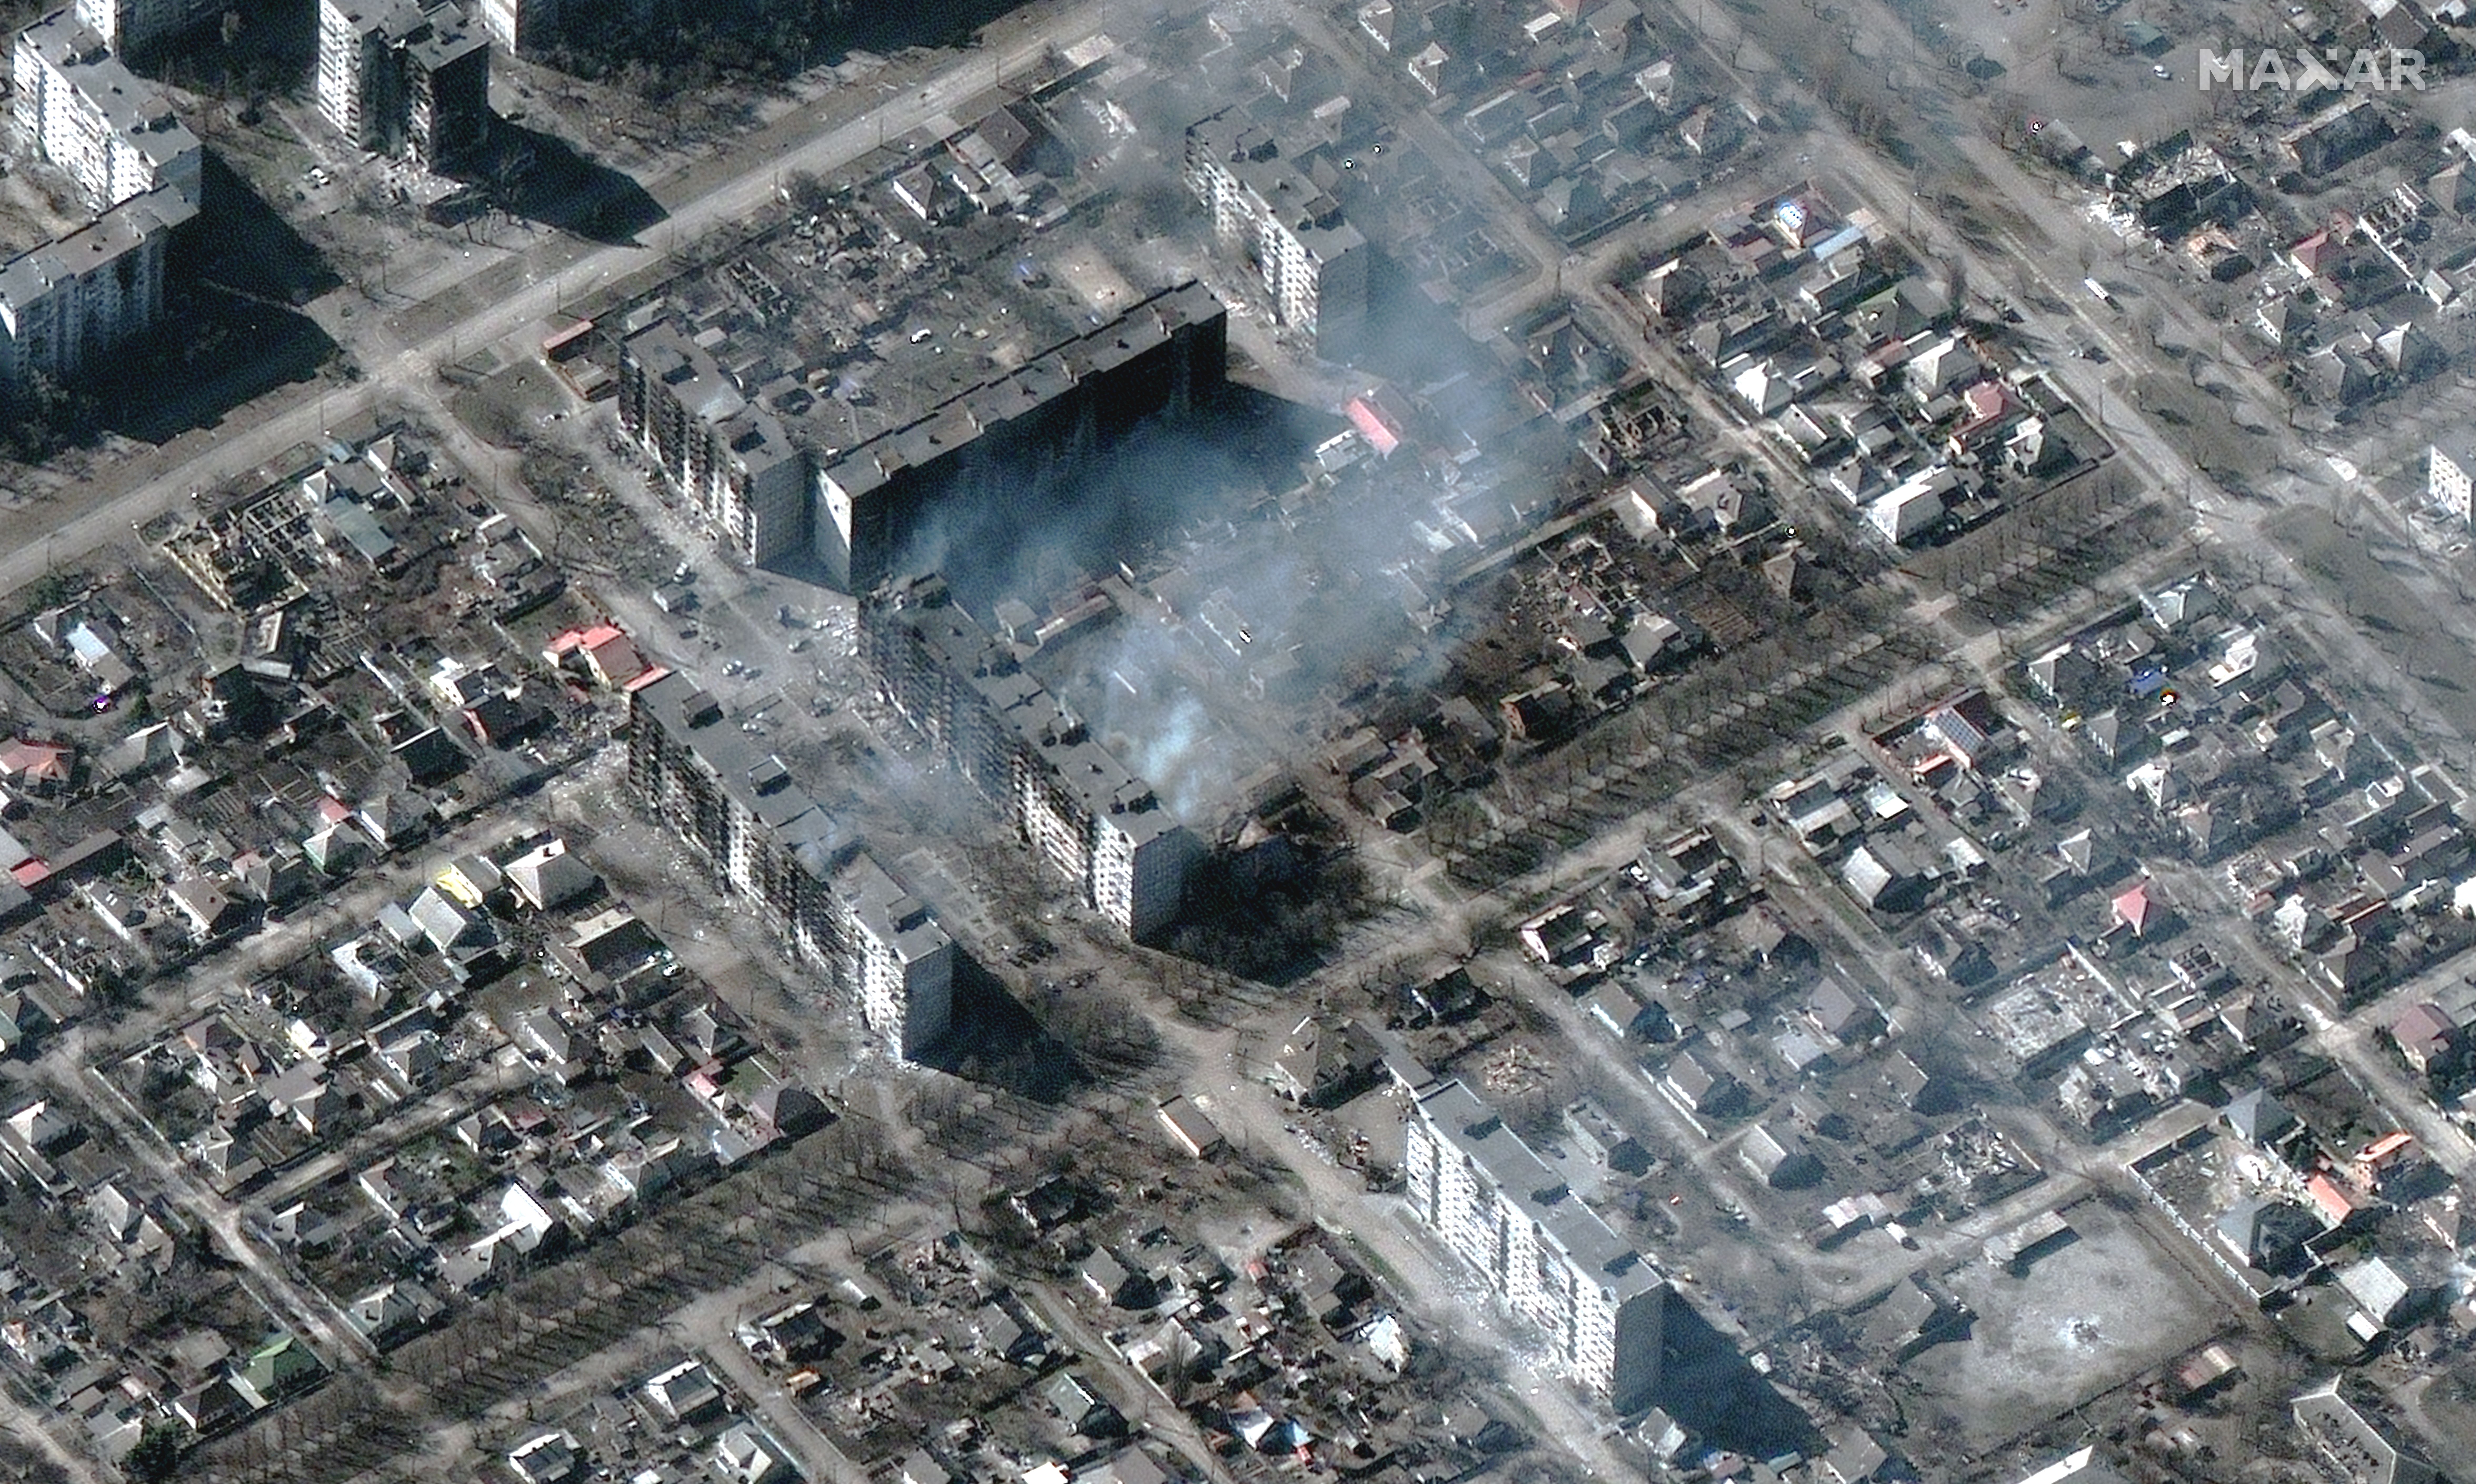 burning and destroyed apartment buildings in Mariupol, Ukraine on March 22.